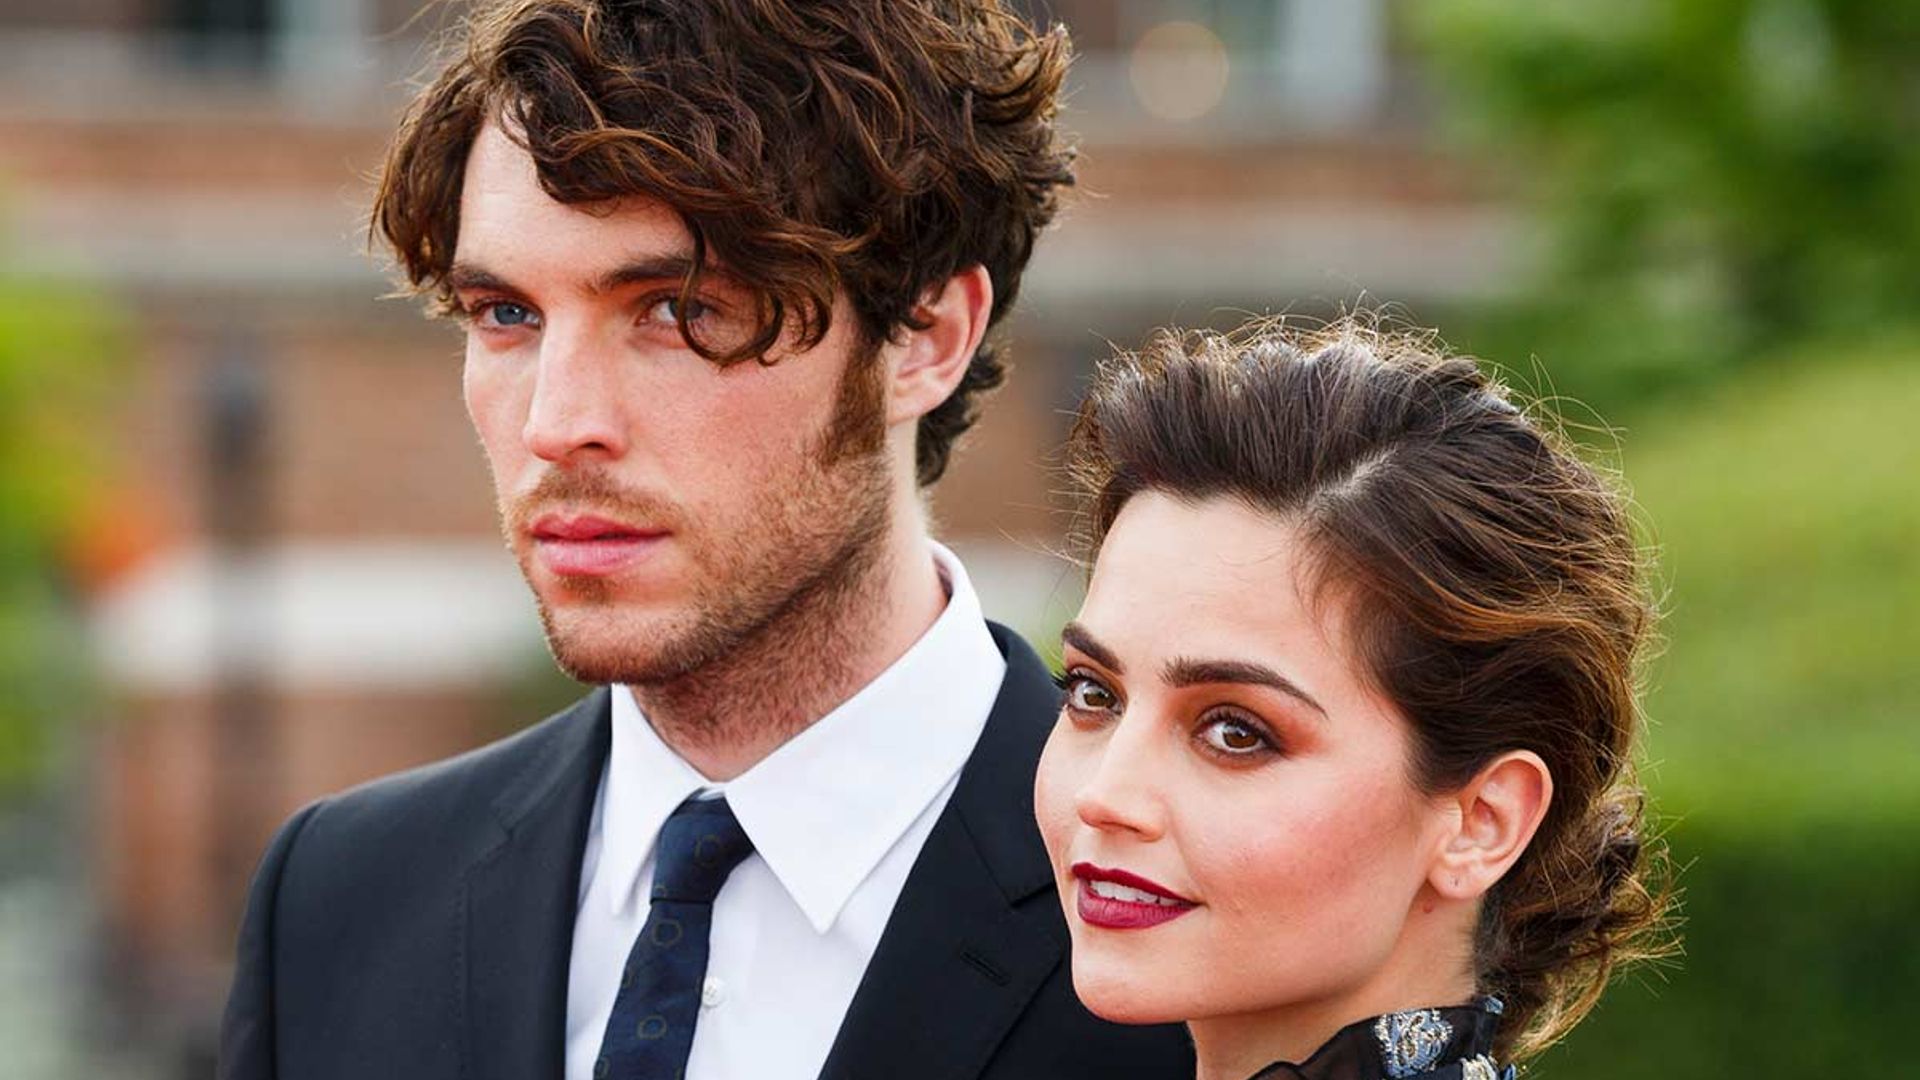 The Serpent's Jenna Coleman's former £2.5million house with Tom Hughes is what dreams are made of